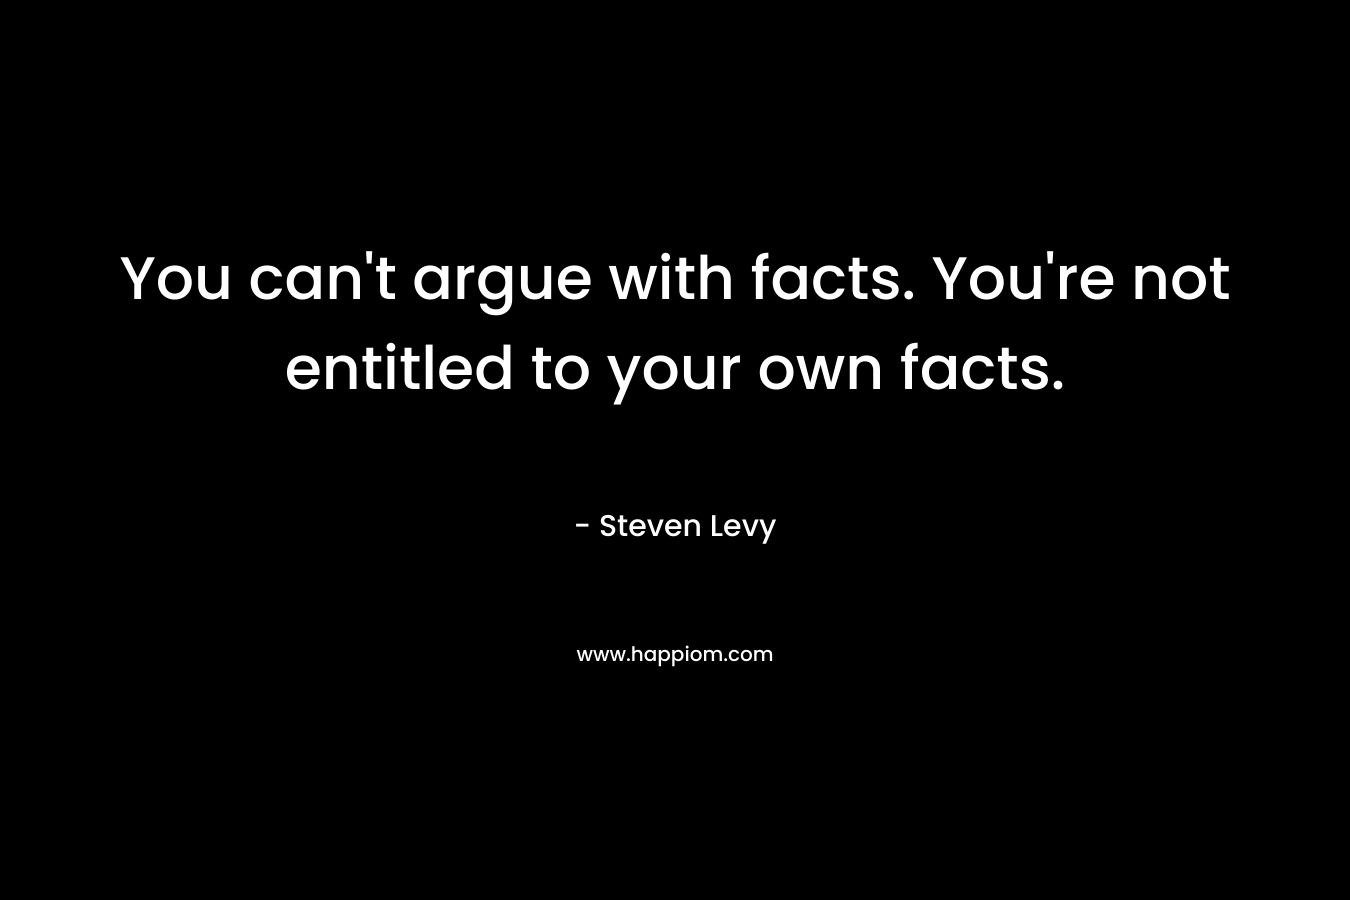 You can't argue with facts. You're not entitled to your own facts.